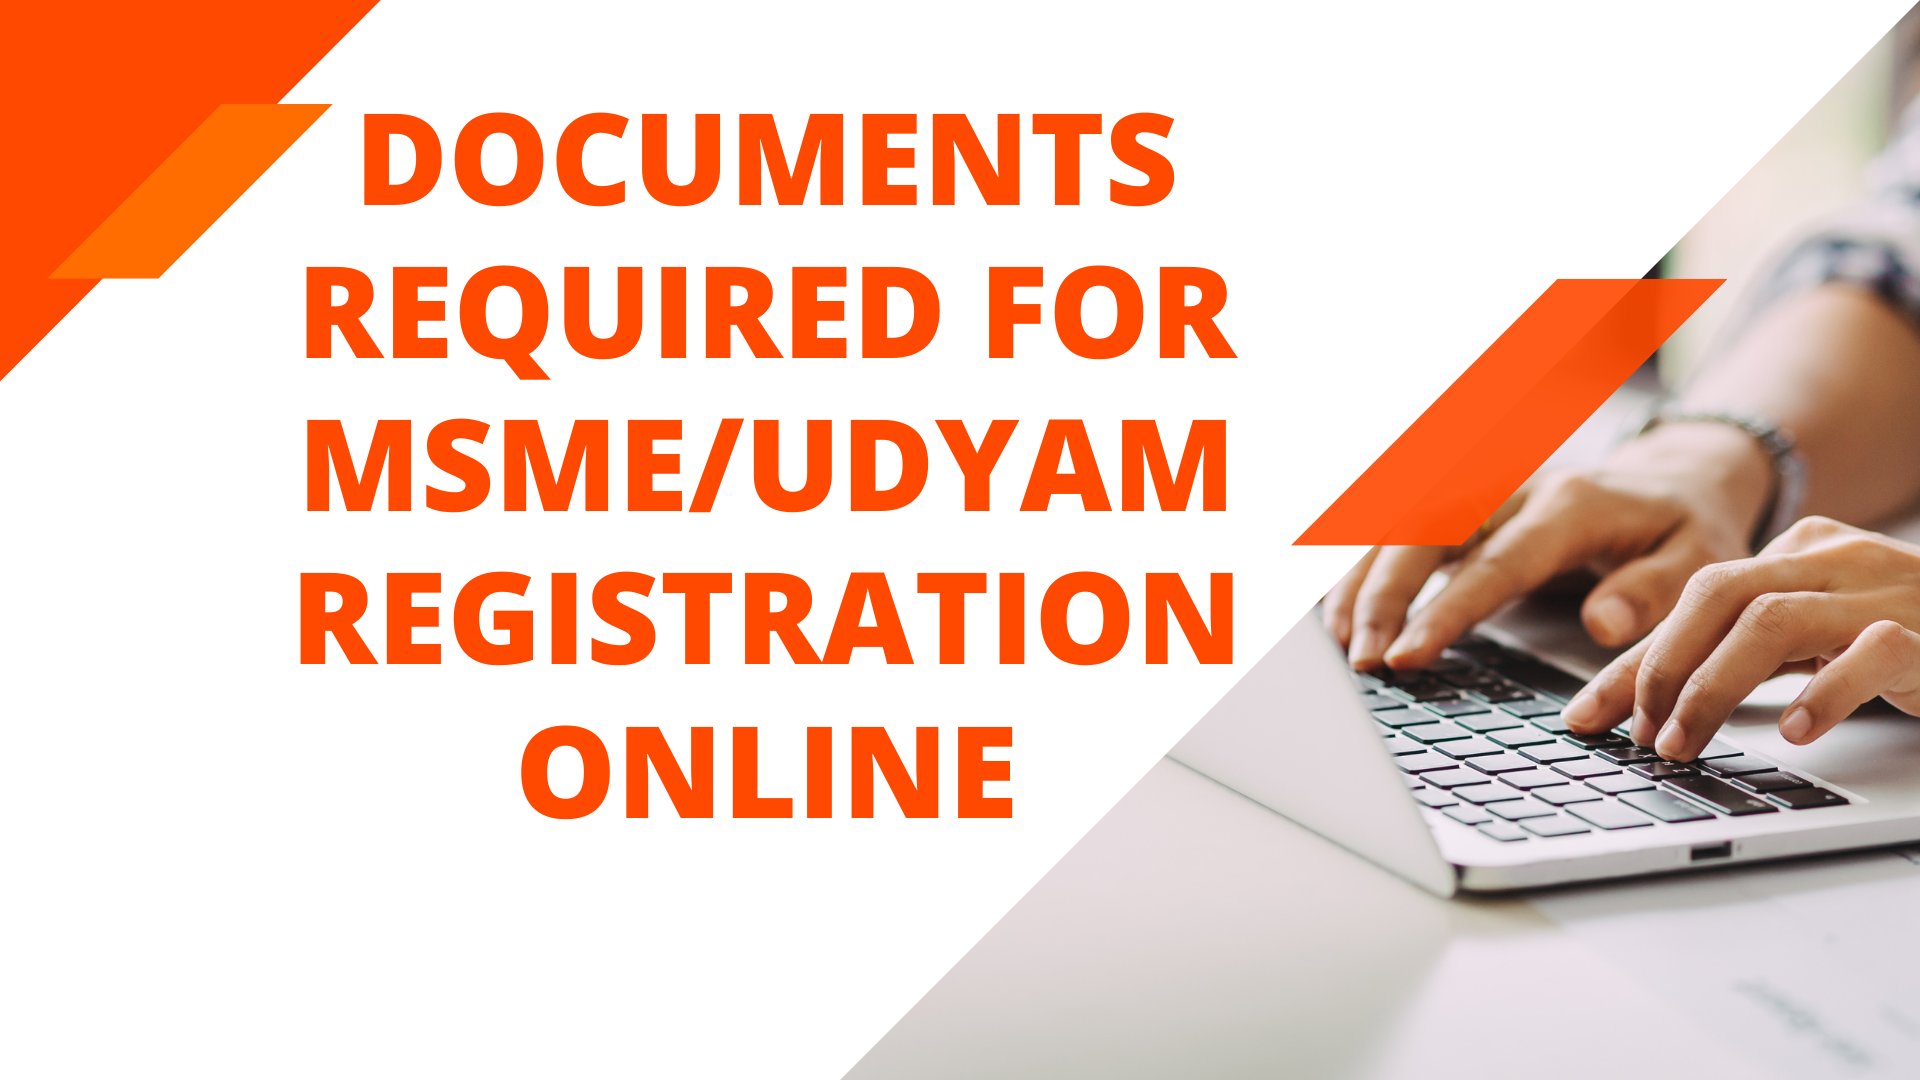 Documents Required for MSME Udyam Registration Online